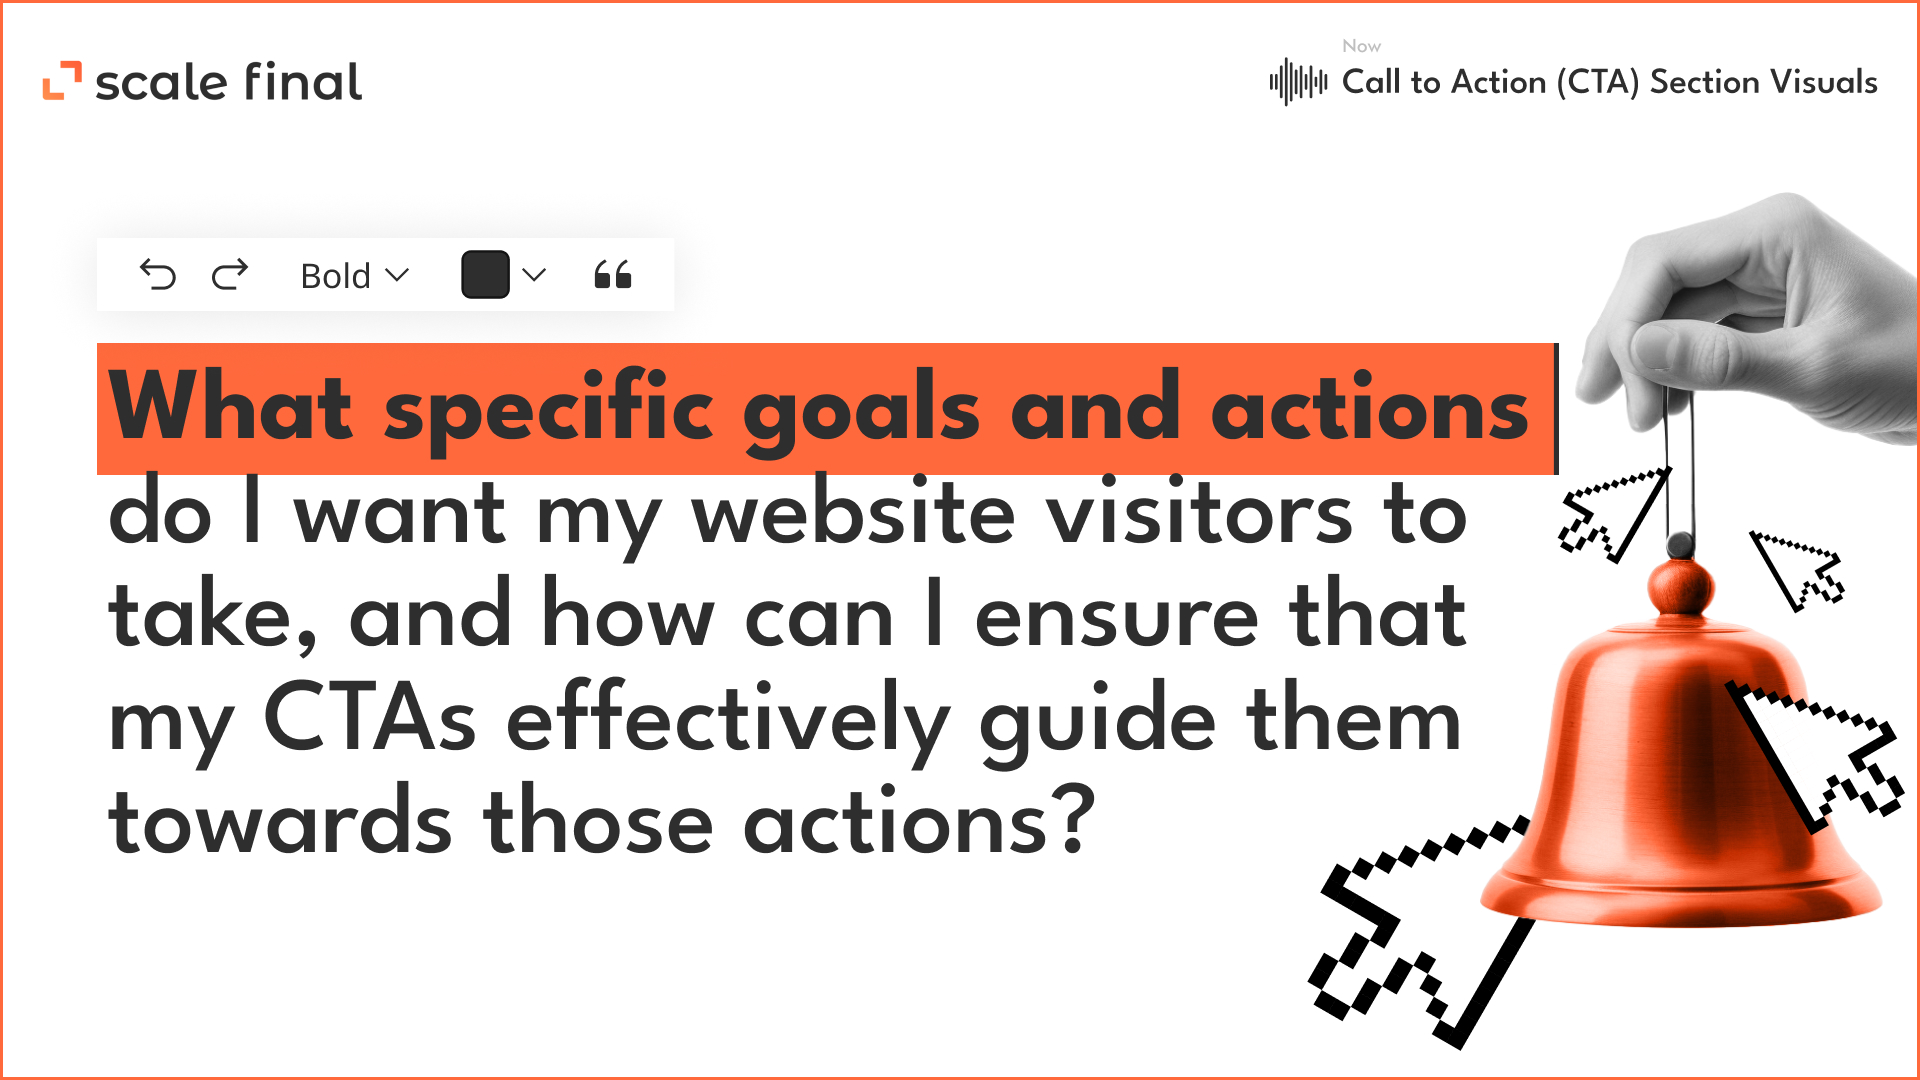 What specific goals and actions do I want my website visitors to take, and how can I ensure that my CTAs effectively guide them towards those actions?